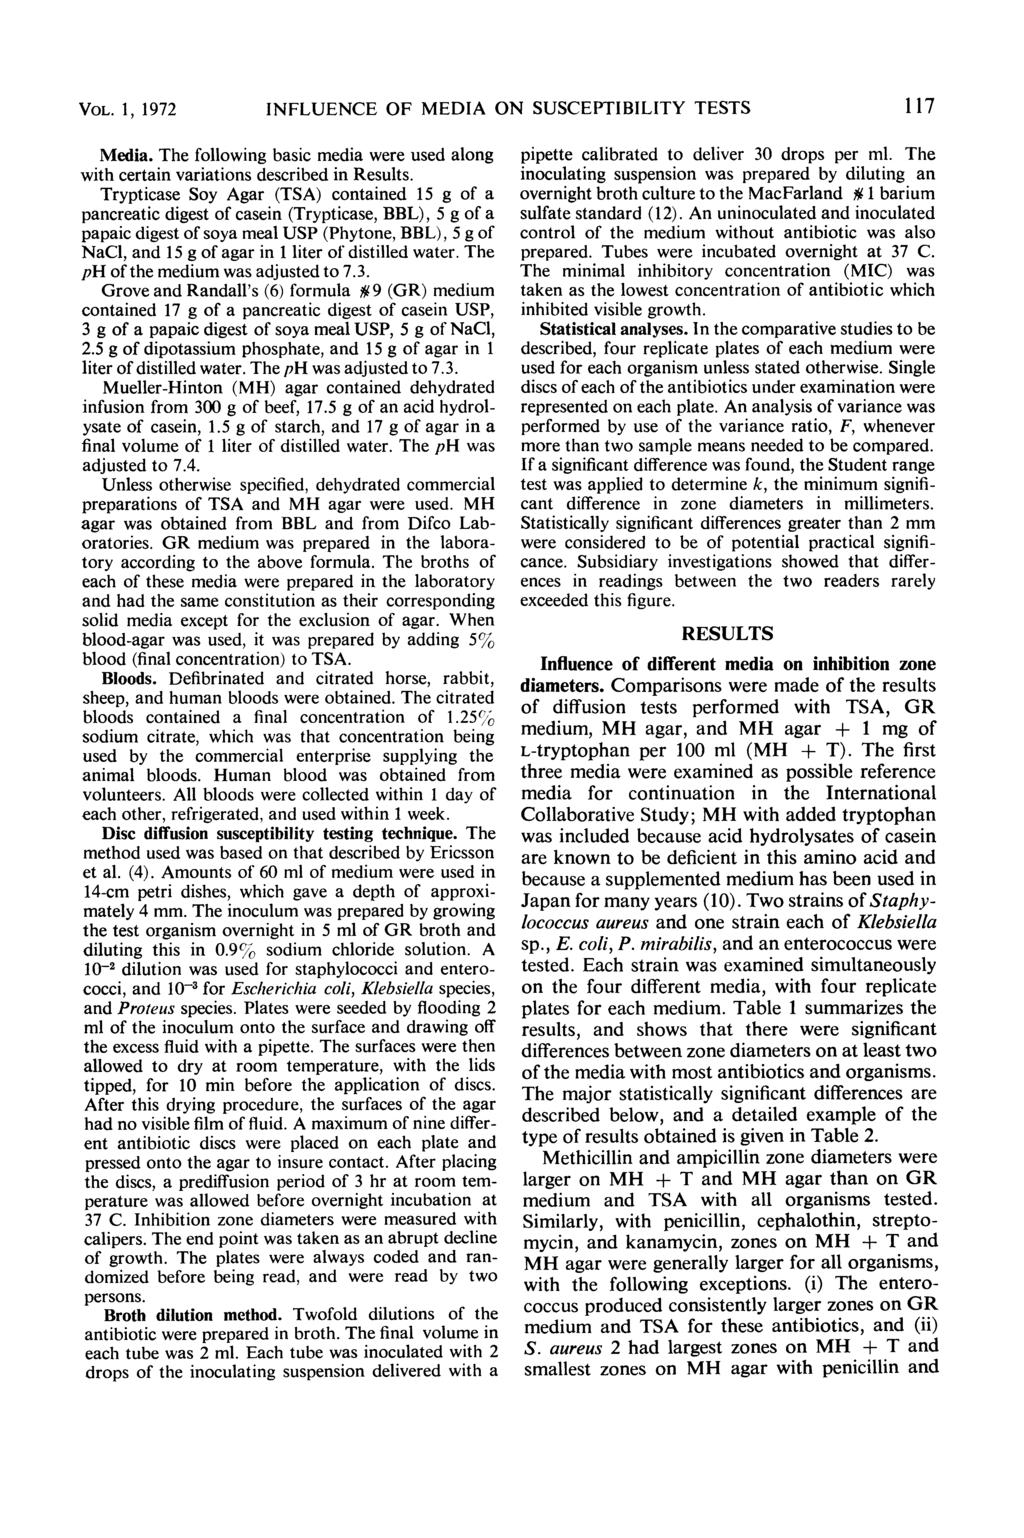 VOL. 1, 1972 INFLUENCE OF MEDIA ON SUSCEPTIBILITY TESTS 117 Media. The following basic media were used along with certain variations described in Results.